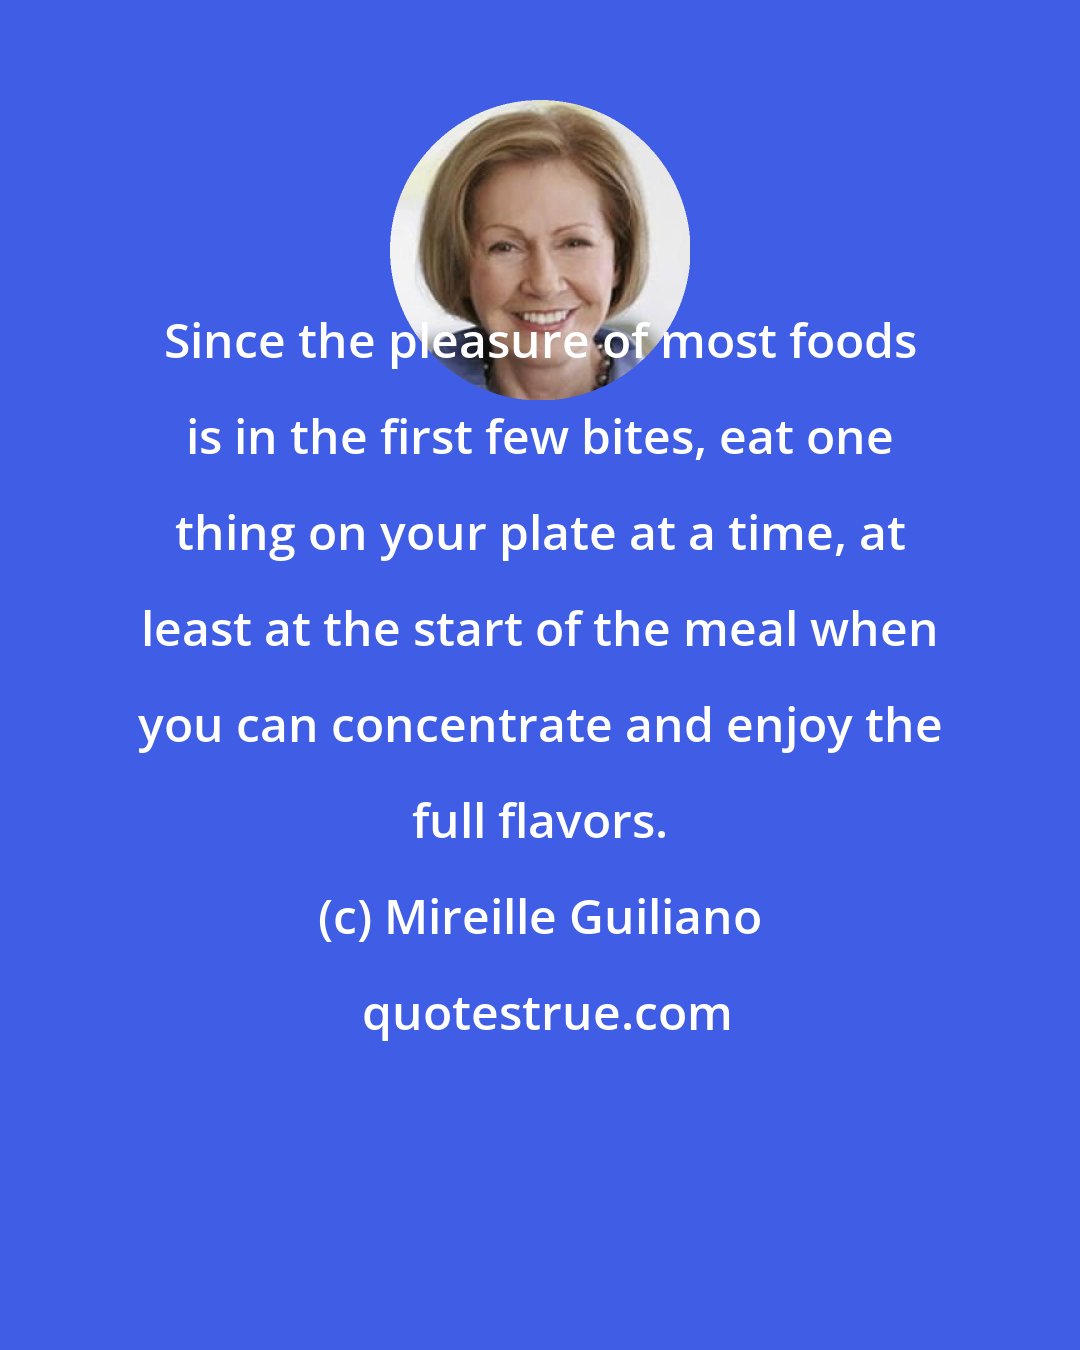 Mireille Guiliano: Since the pleasure of most foods is in the first few bites, eat one thing on your plate at a time, at least at the start of the meal when you can concentrate and enjoy the full flavors.